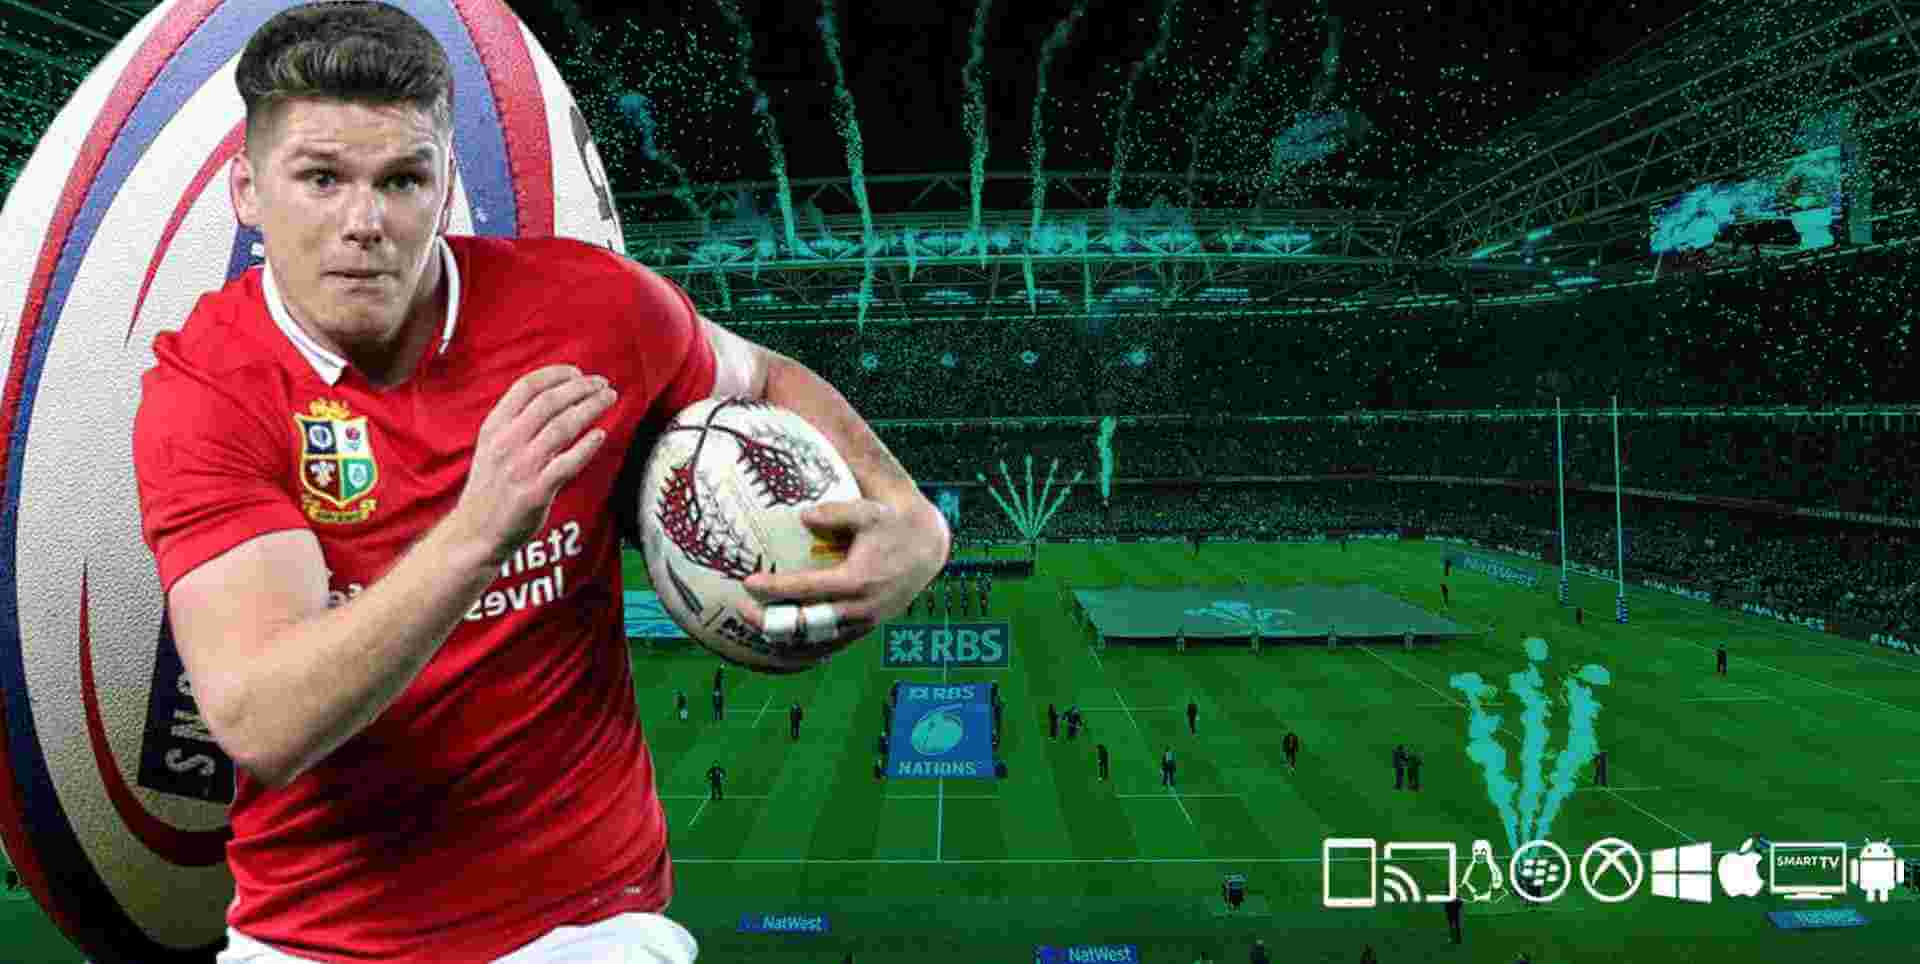 6 Nations Rugby Online Six Nation 2023 Live Stream